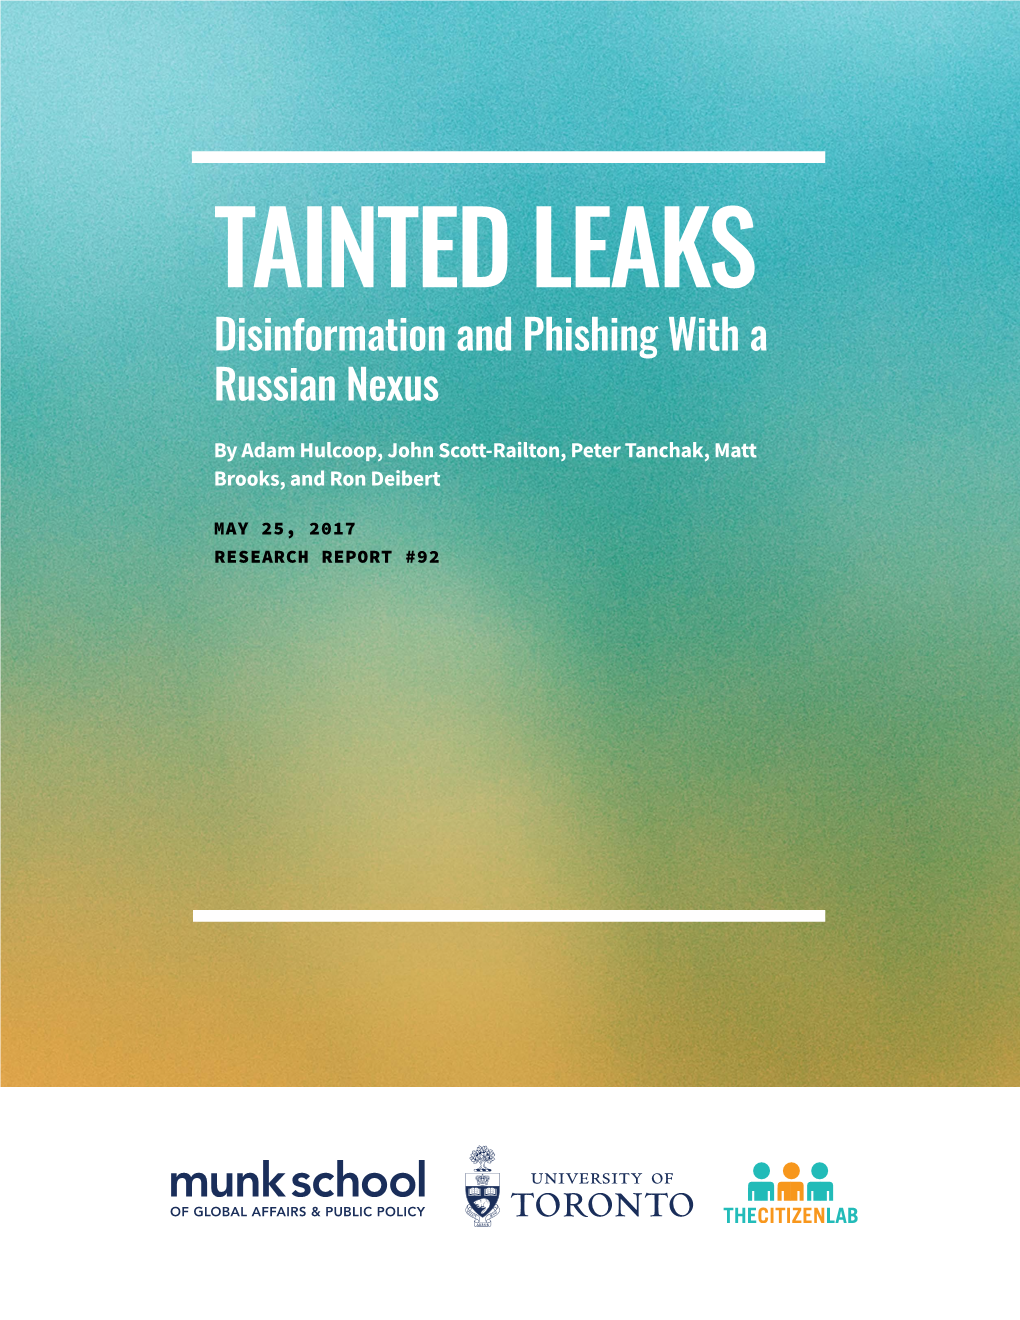 TAINTED LEAKS Disinformation and Phishing with a Russian Nexus